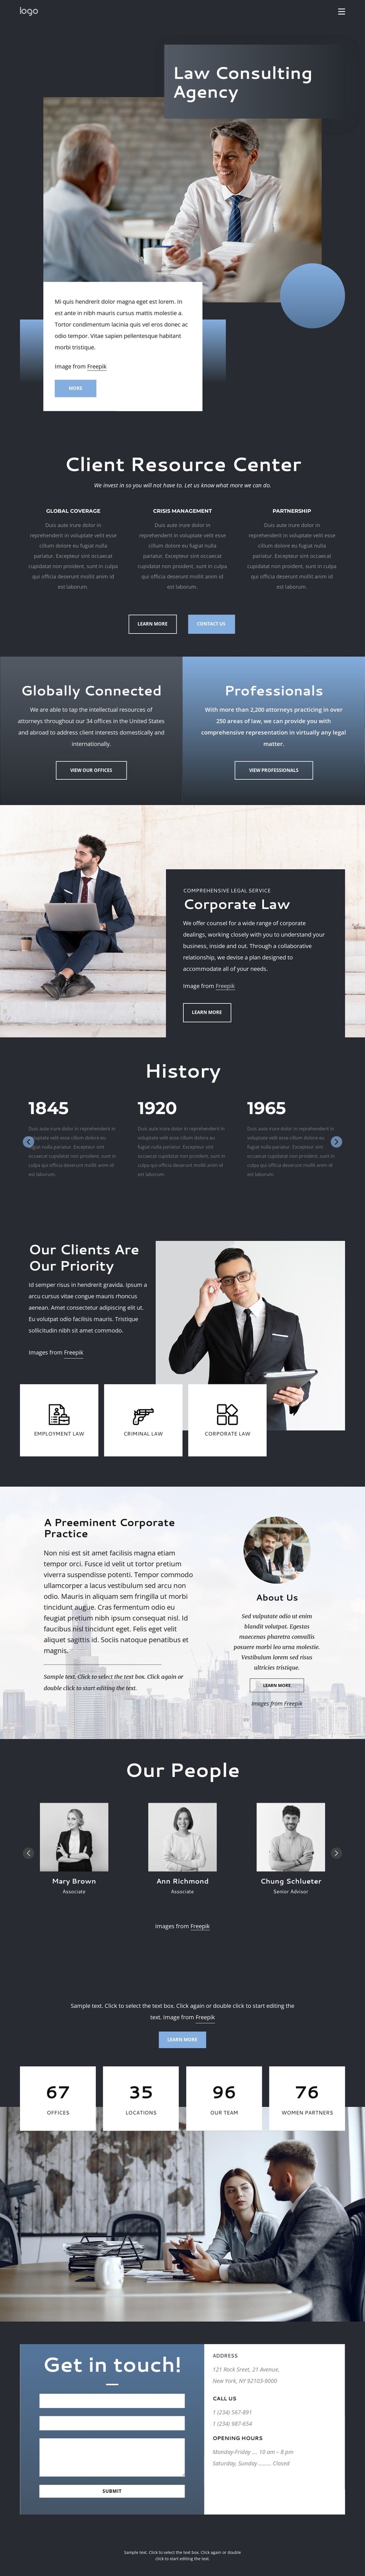 Law consulting agency WordPress Theme